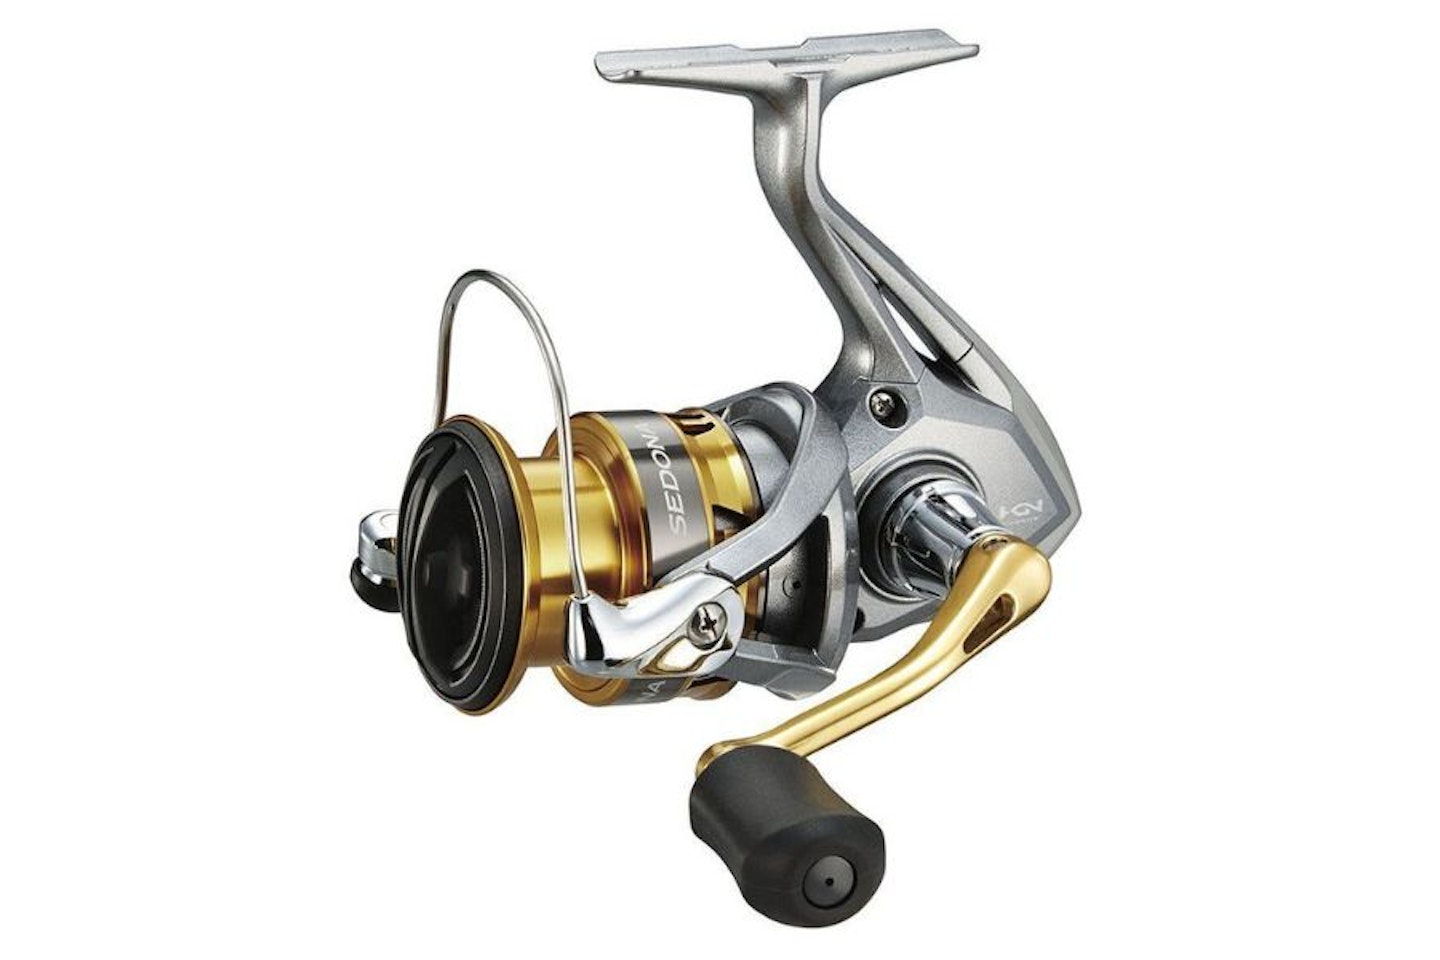 10 Best Spinning Reels For Bass 2019 